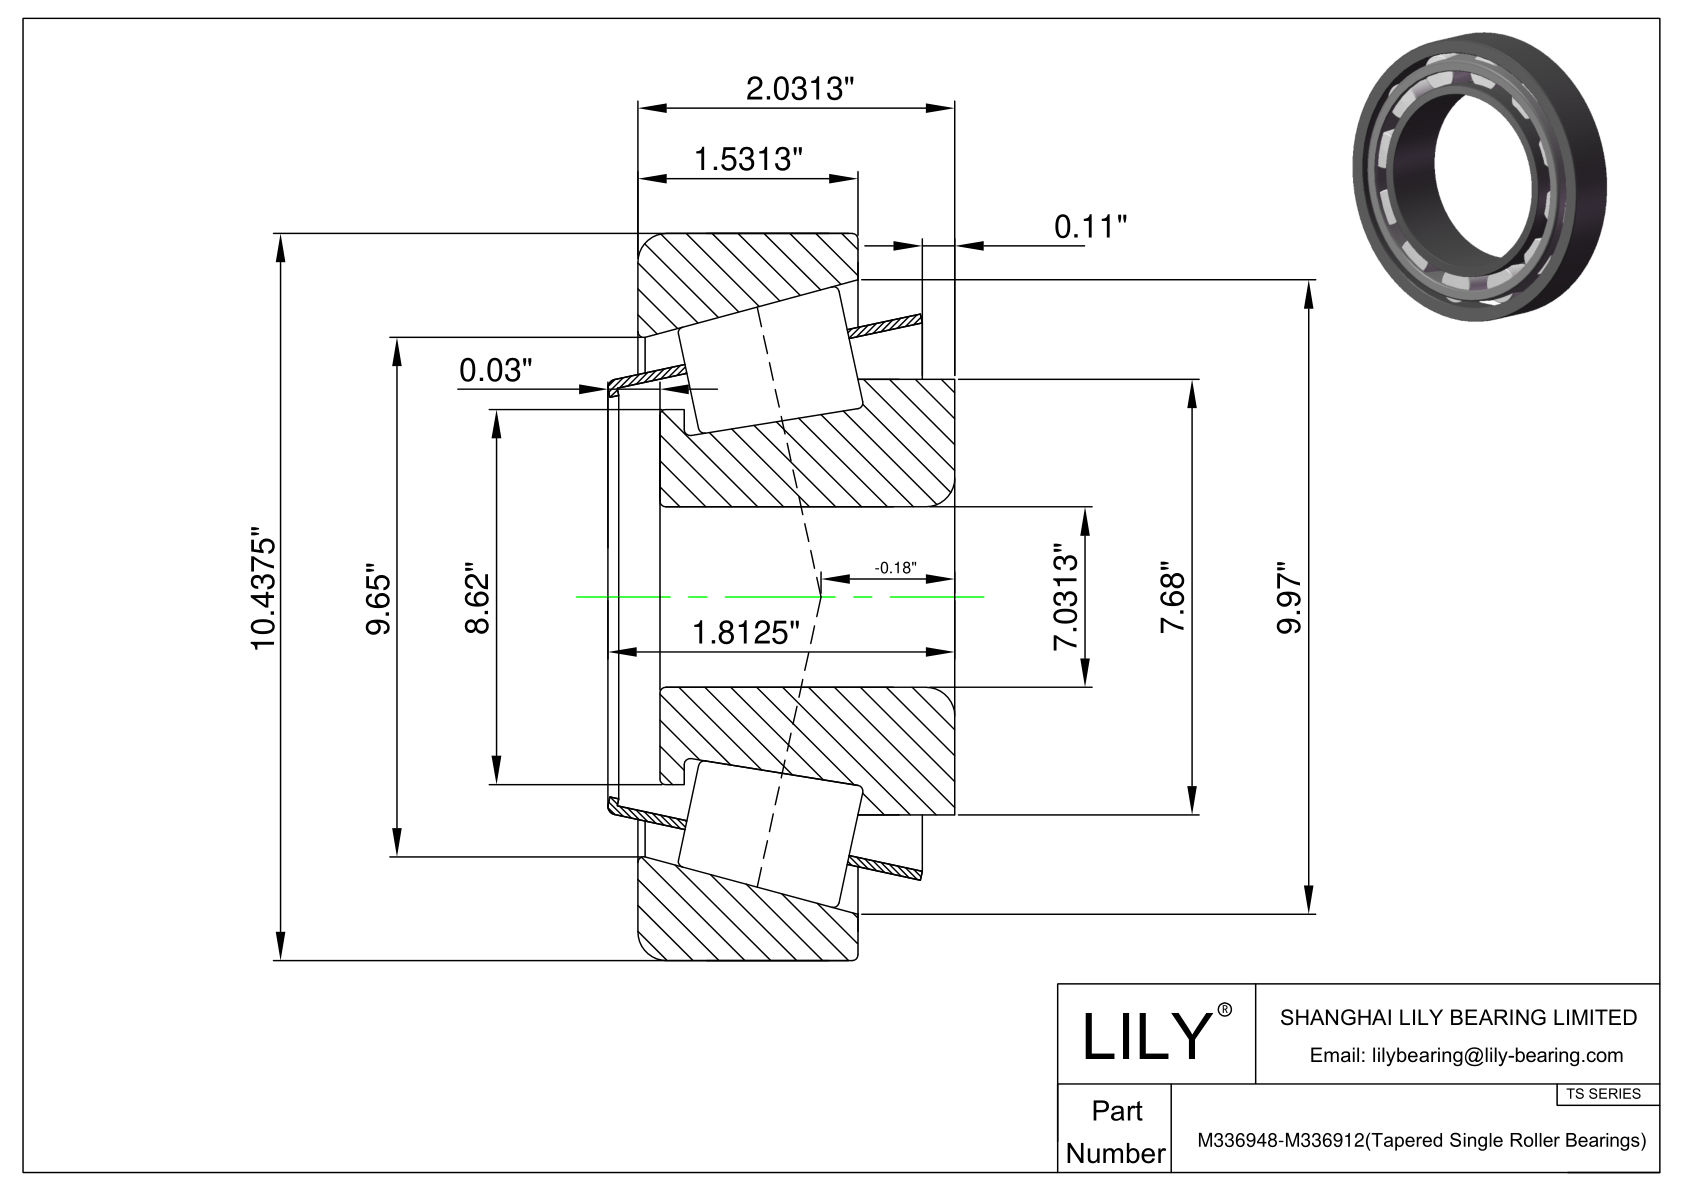 M336948-M336912 TS (Tapered Single Roller Bearings) (Imperial) cad drawing